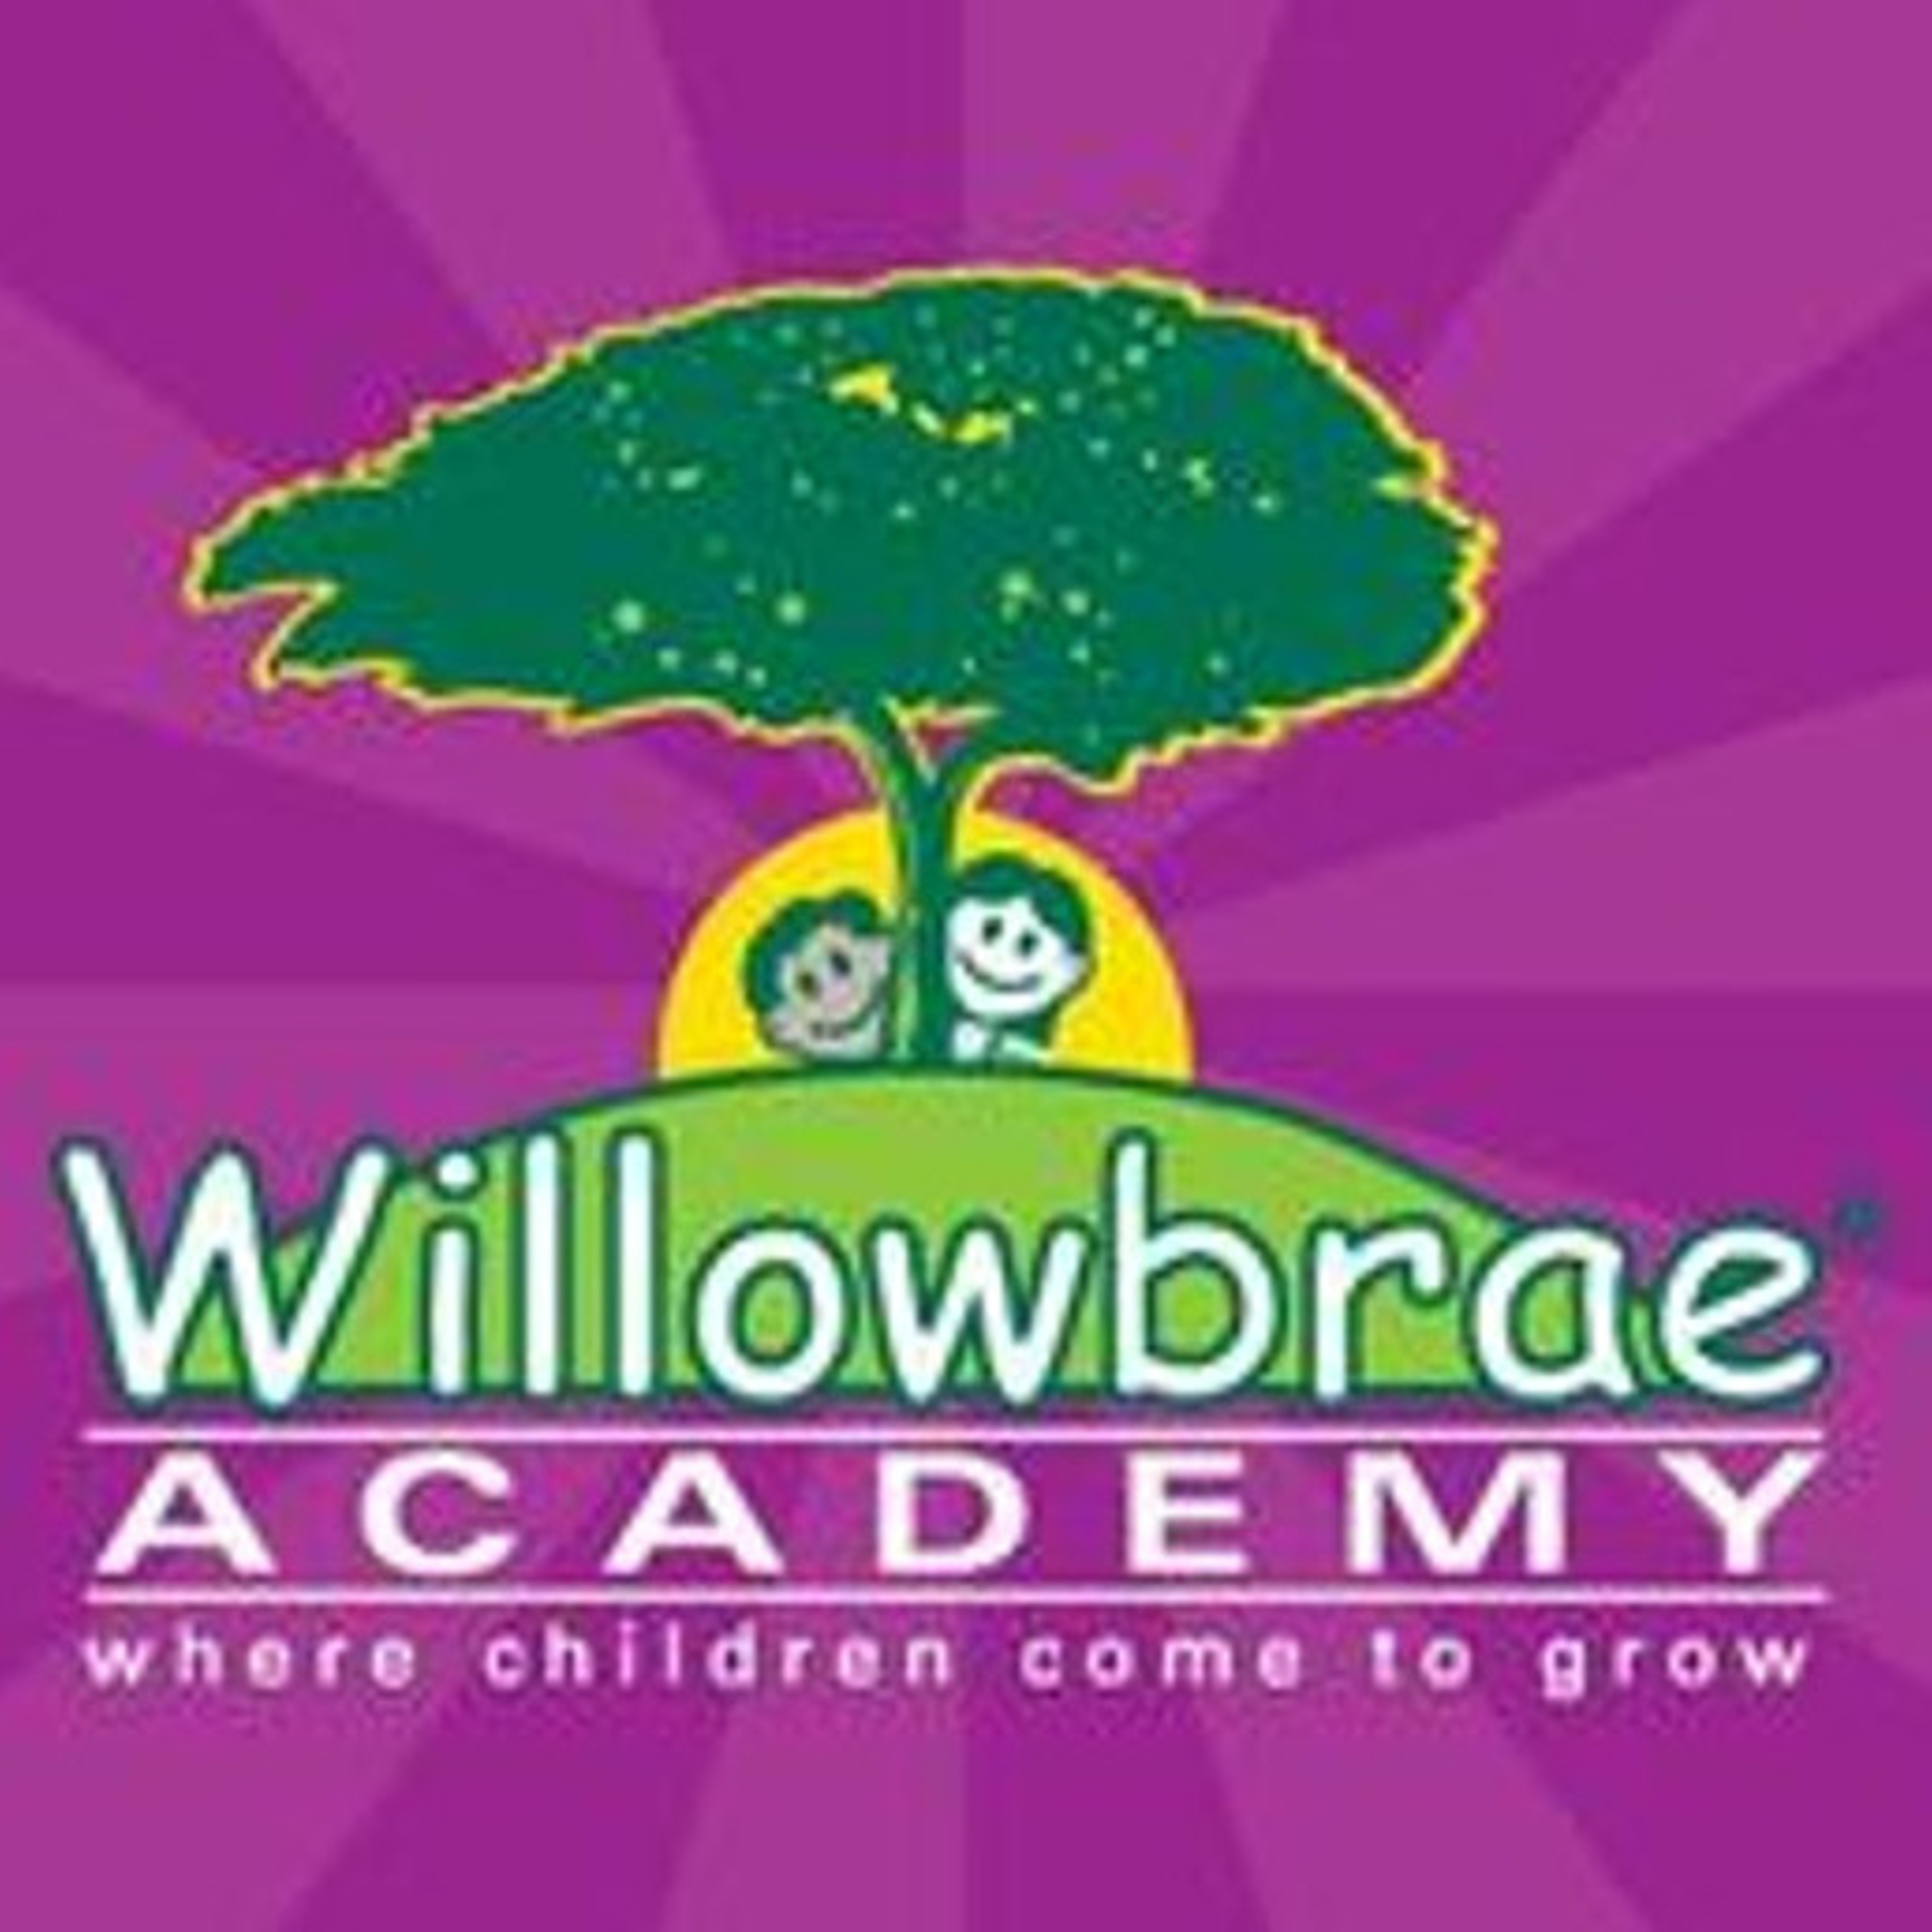 Willowbrae is a fast-growing nationwide company looking to add an RECE to the team.